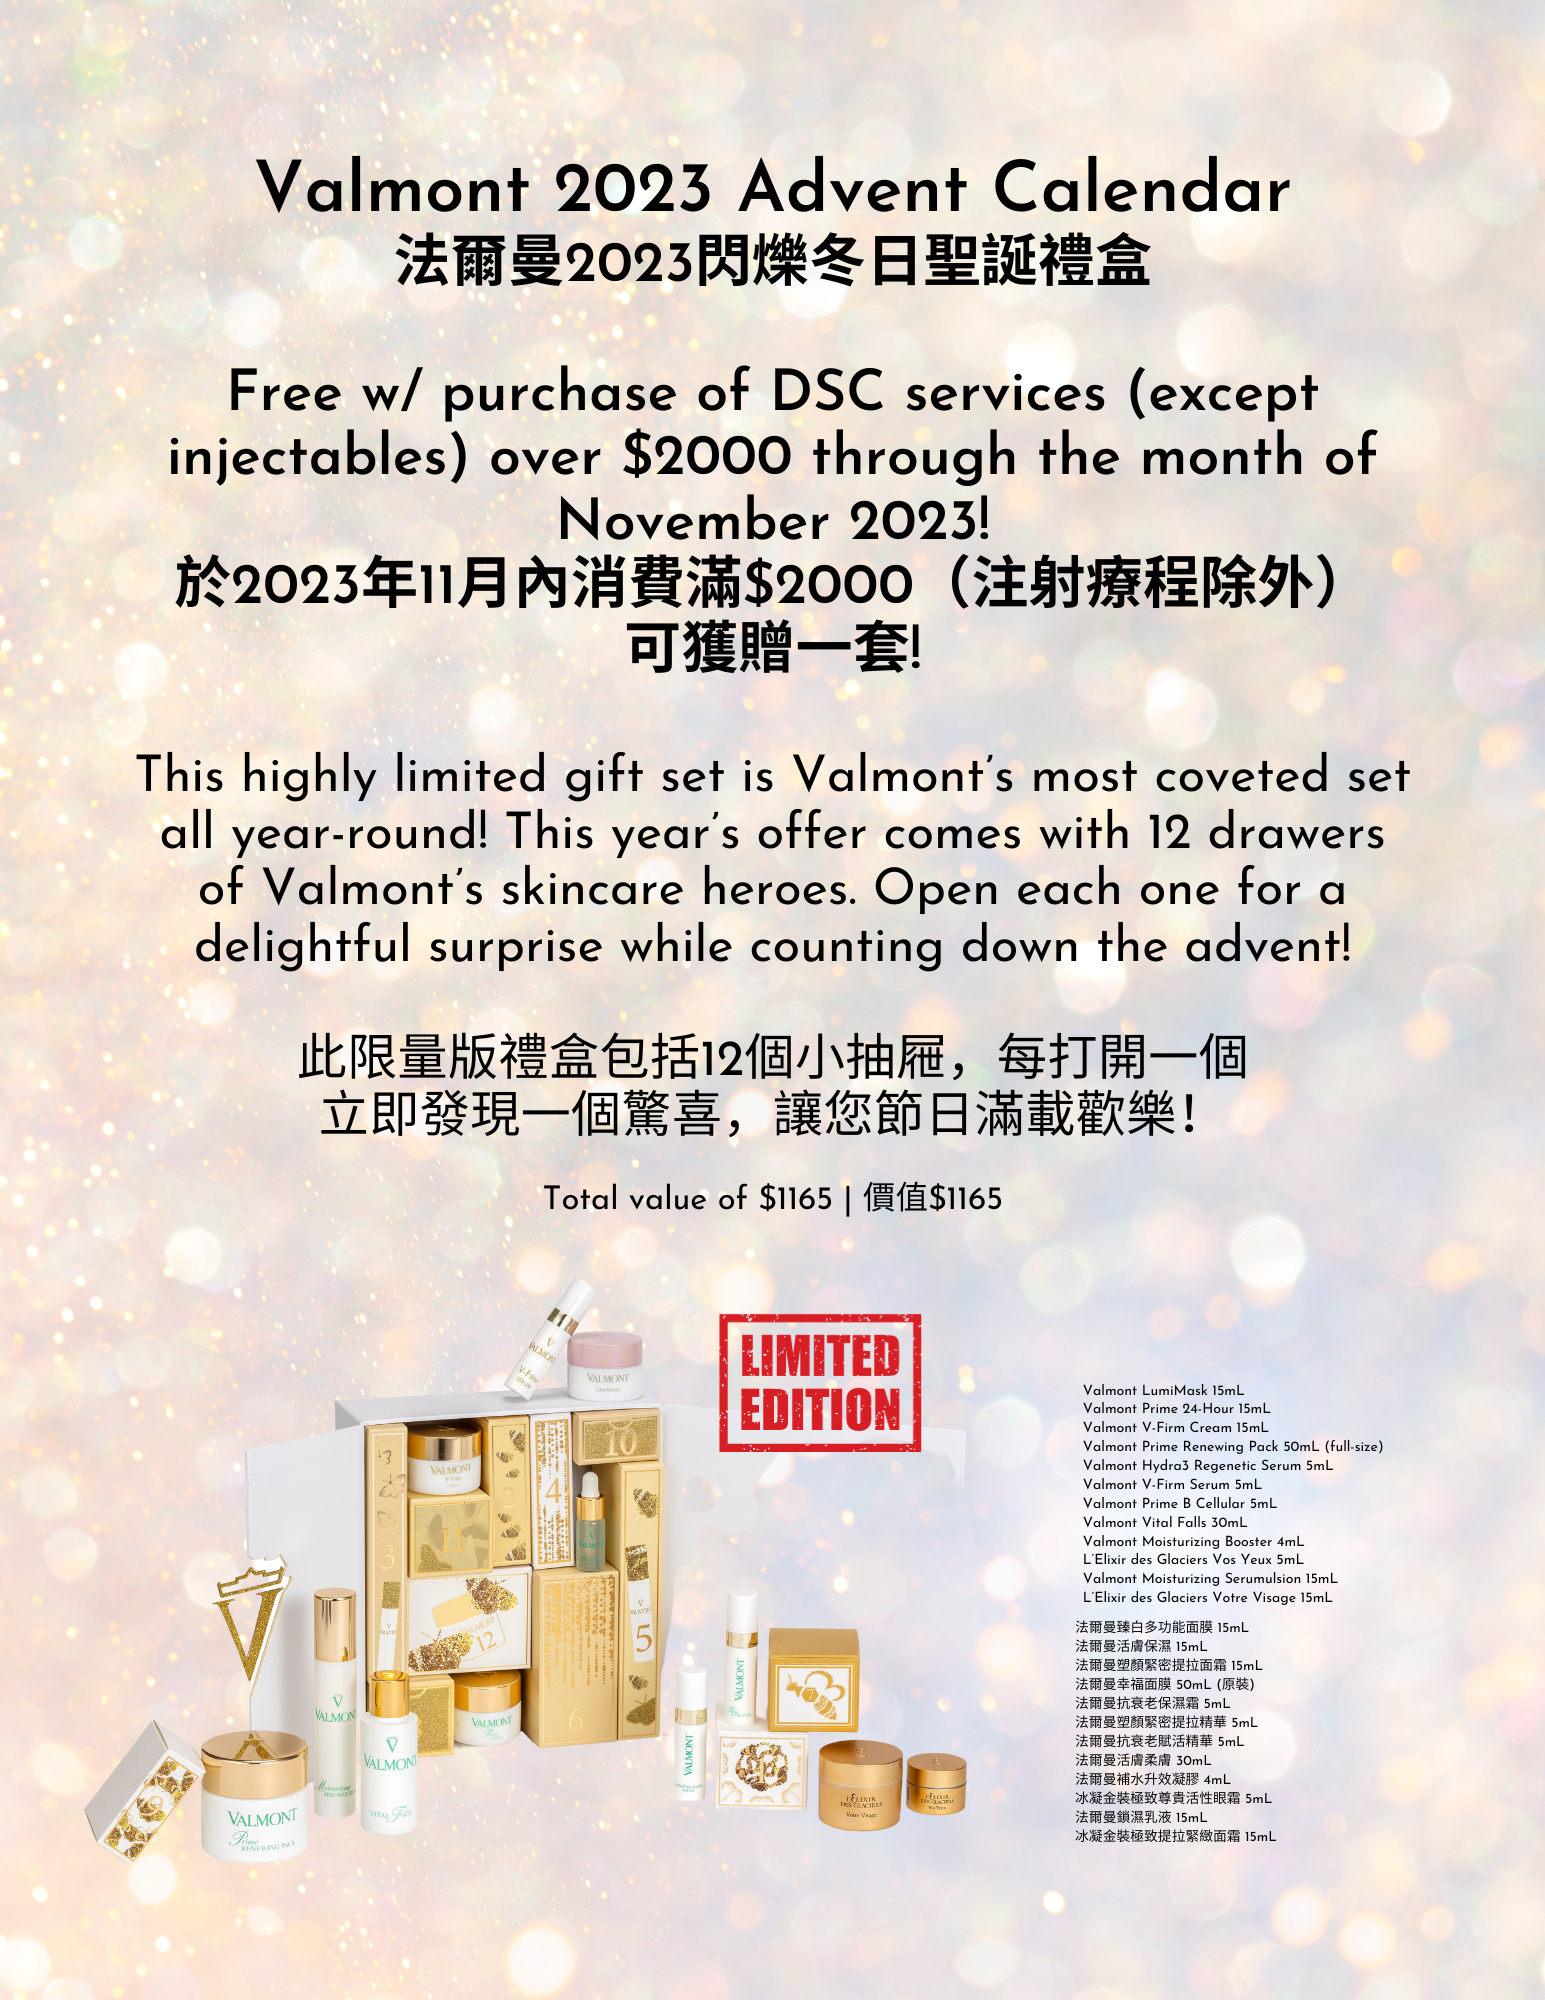 DSC Valmont Advent Calendar 2023 GWP Special Flyer, gift with purchase when $2000+ in DSC services (excluding injectables) are purchased through November 2023